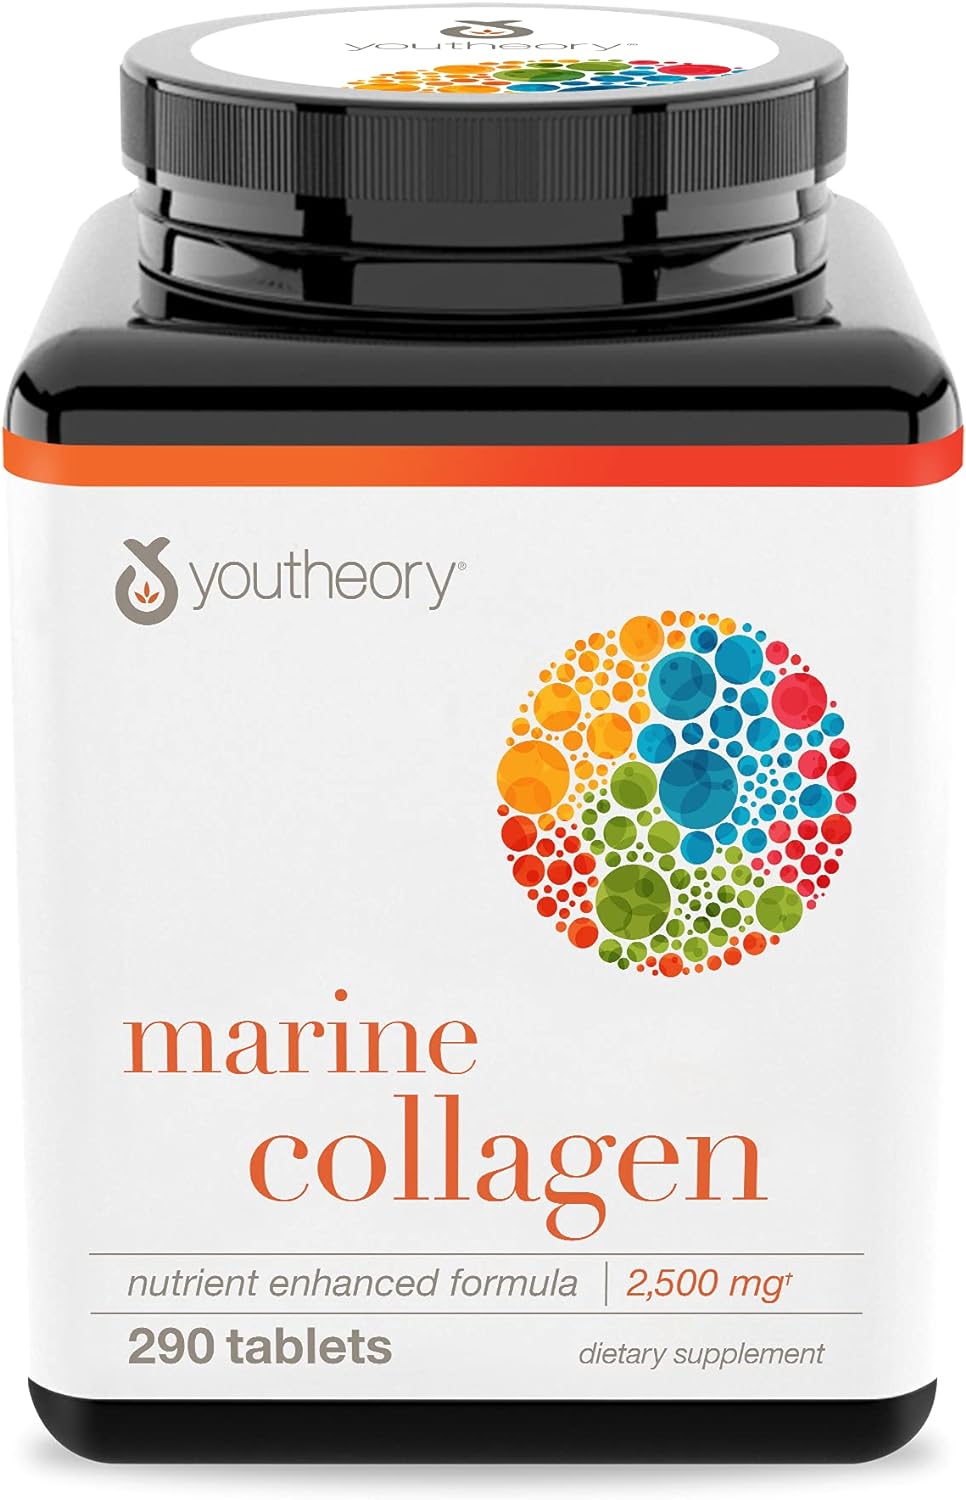 Youtheory Marine Collagen, 290 Count290 Count (Pack of 1)10.56 Ounces